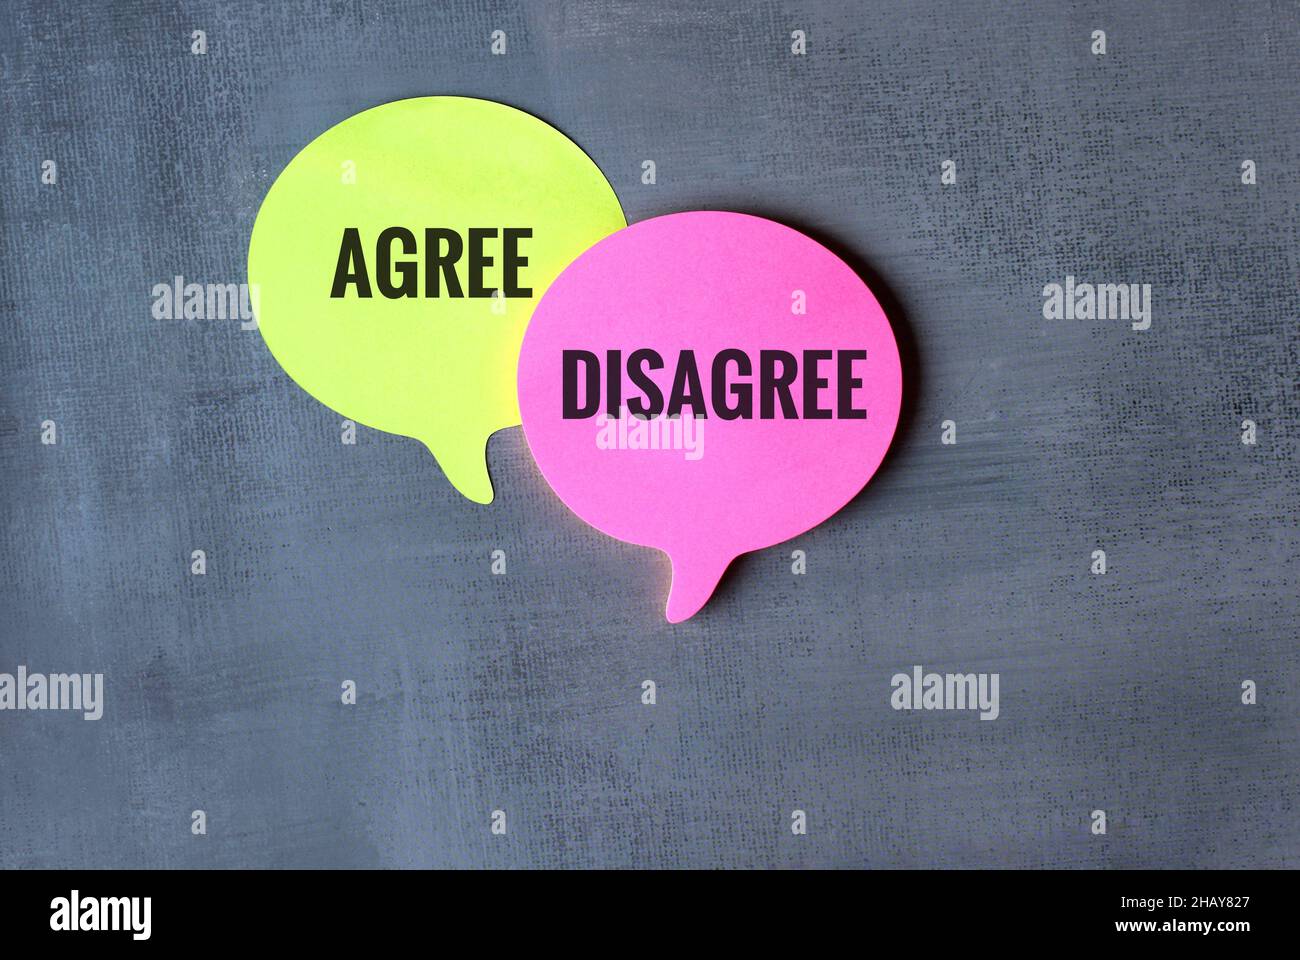 Opinion, argument and discussion concept. Speech bubble with text AGREE and DISAGREE Stock Photo